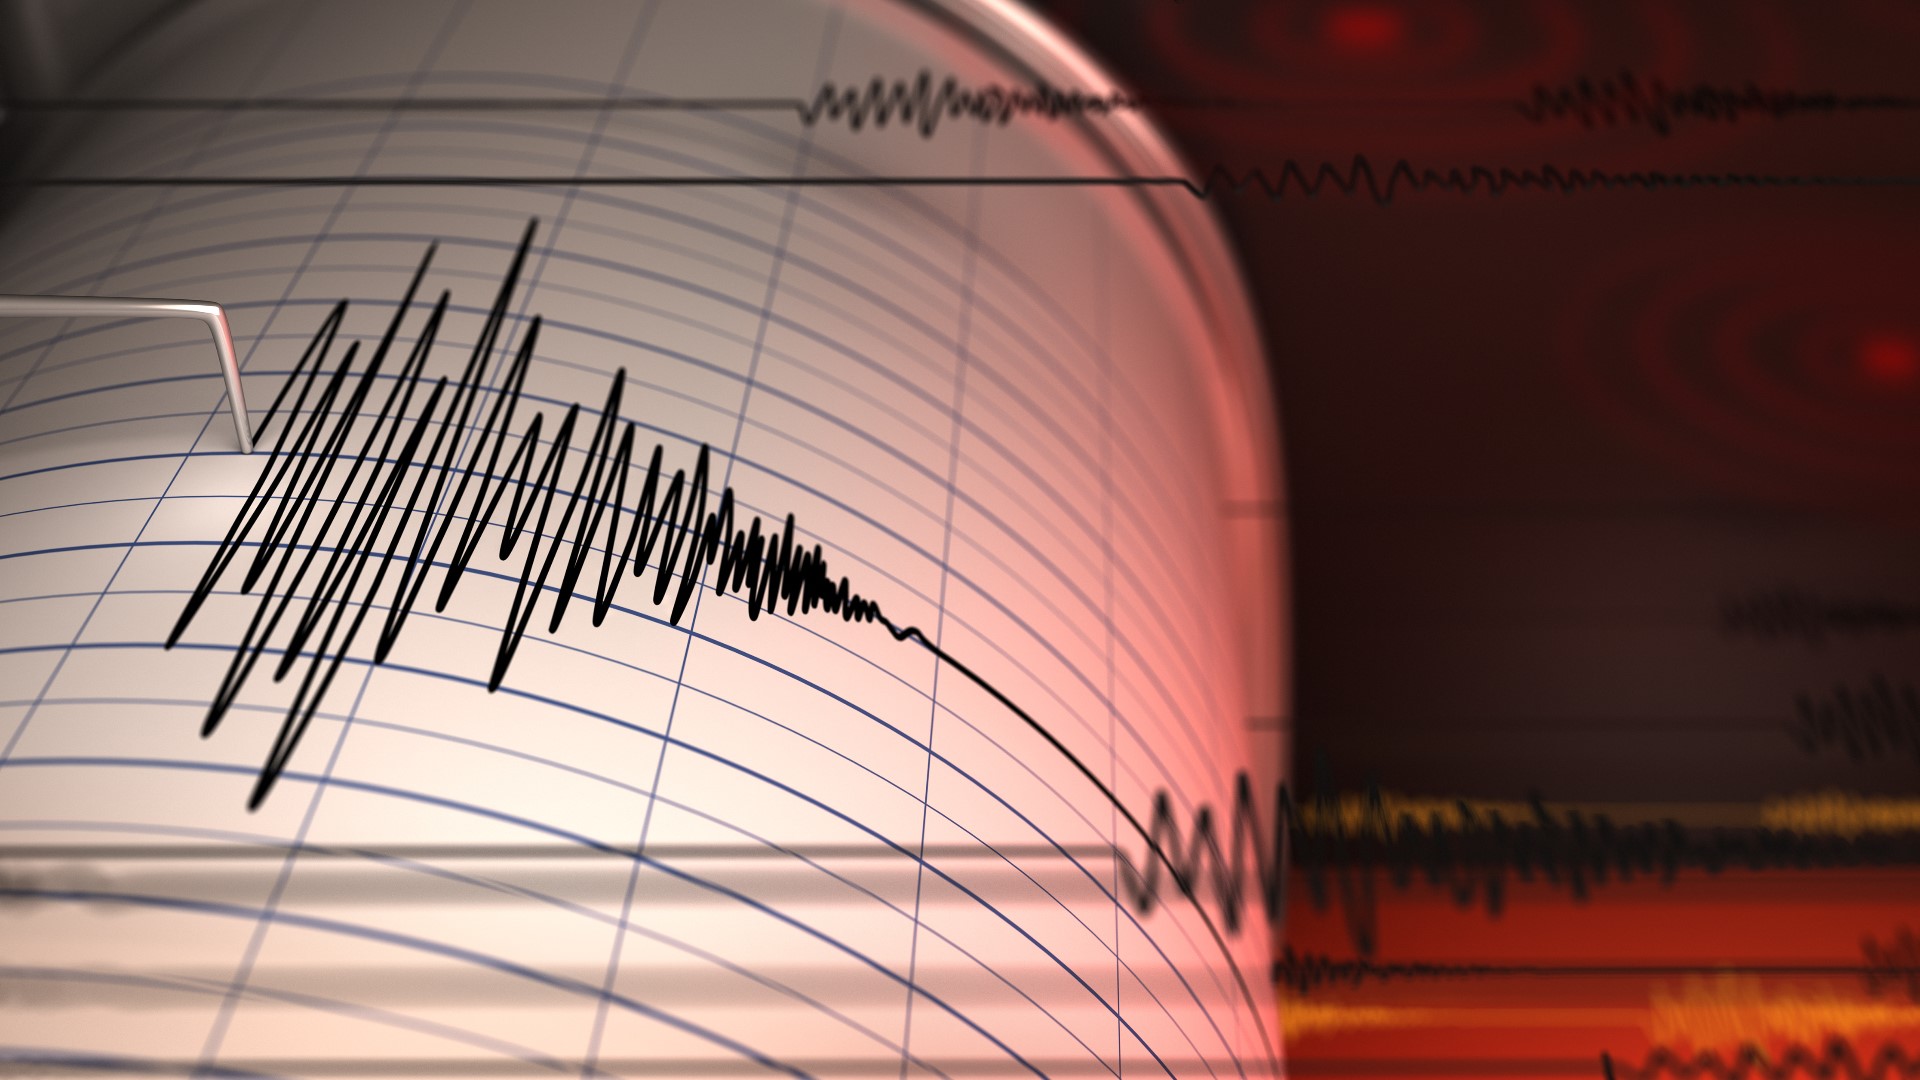 Anytime an earthquake happens, rumors of “the Big One” start to ramp up. And right after the back-to-back earthquakes in Ridgecrest, people went to social media worrying about just that. So, could the Ridgecrest earthquake trigger a major earthquake? Let’s Verify!